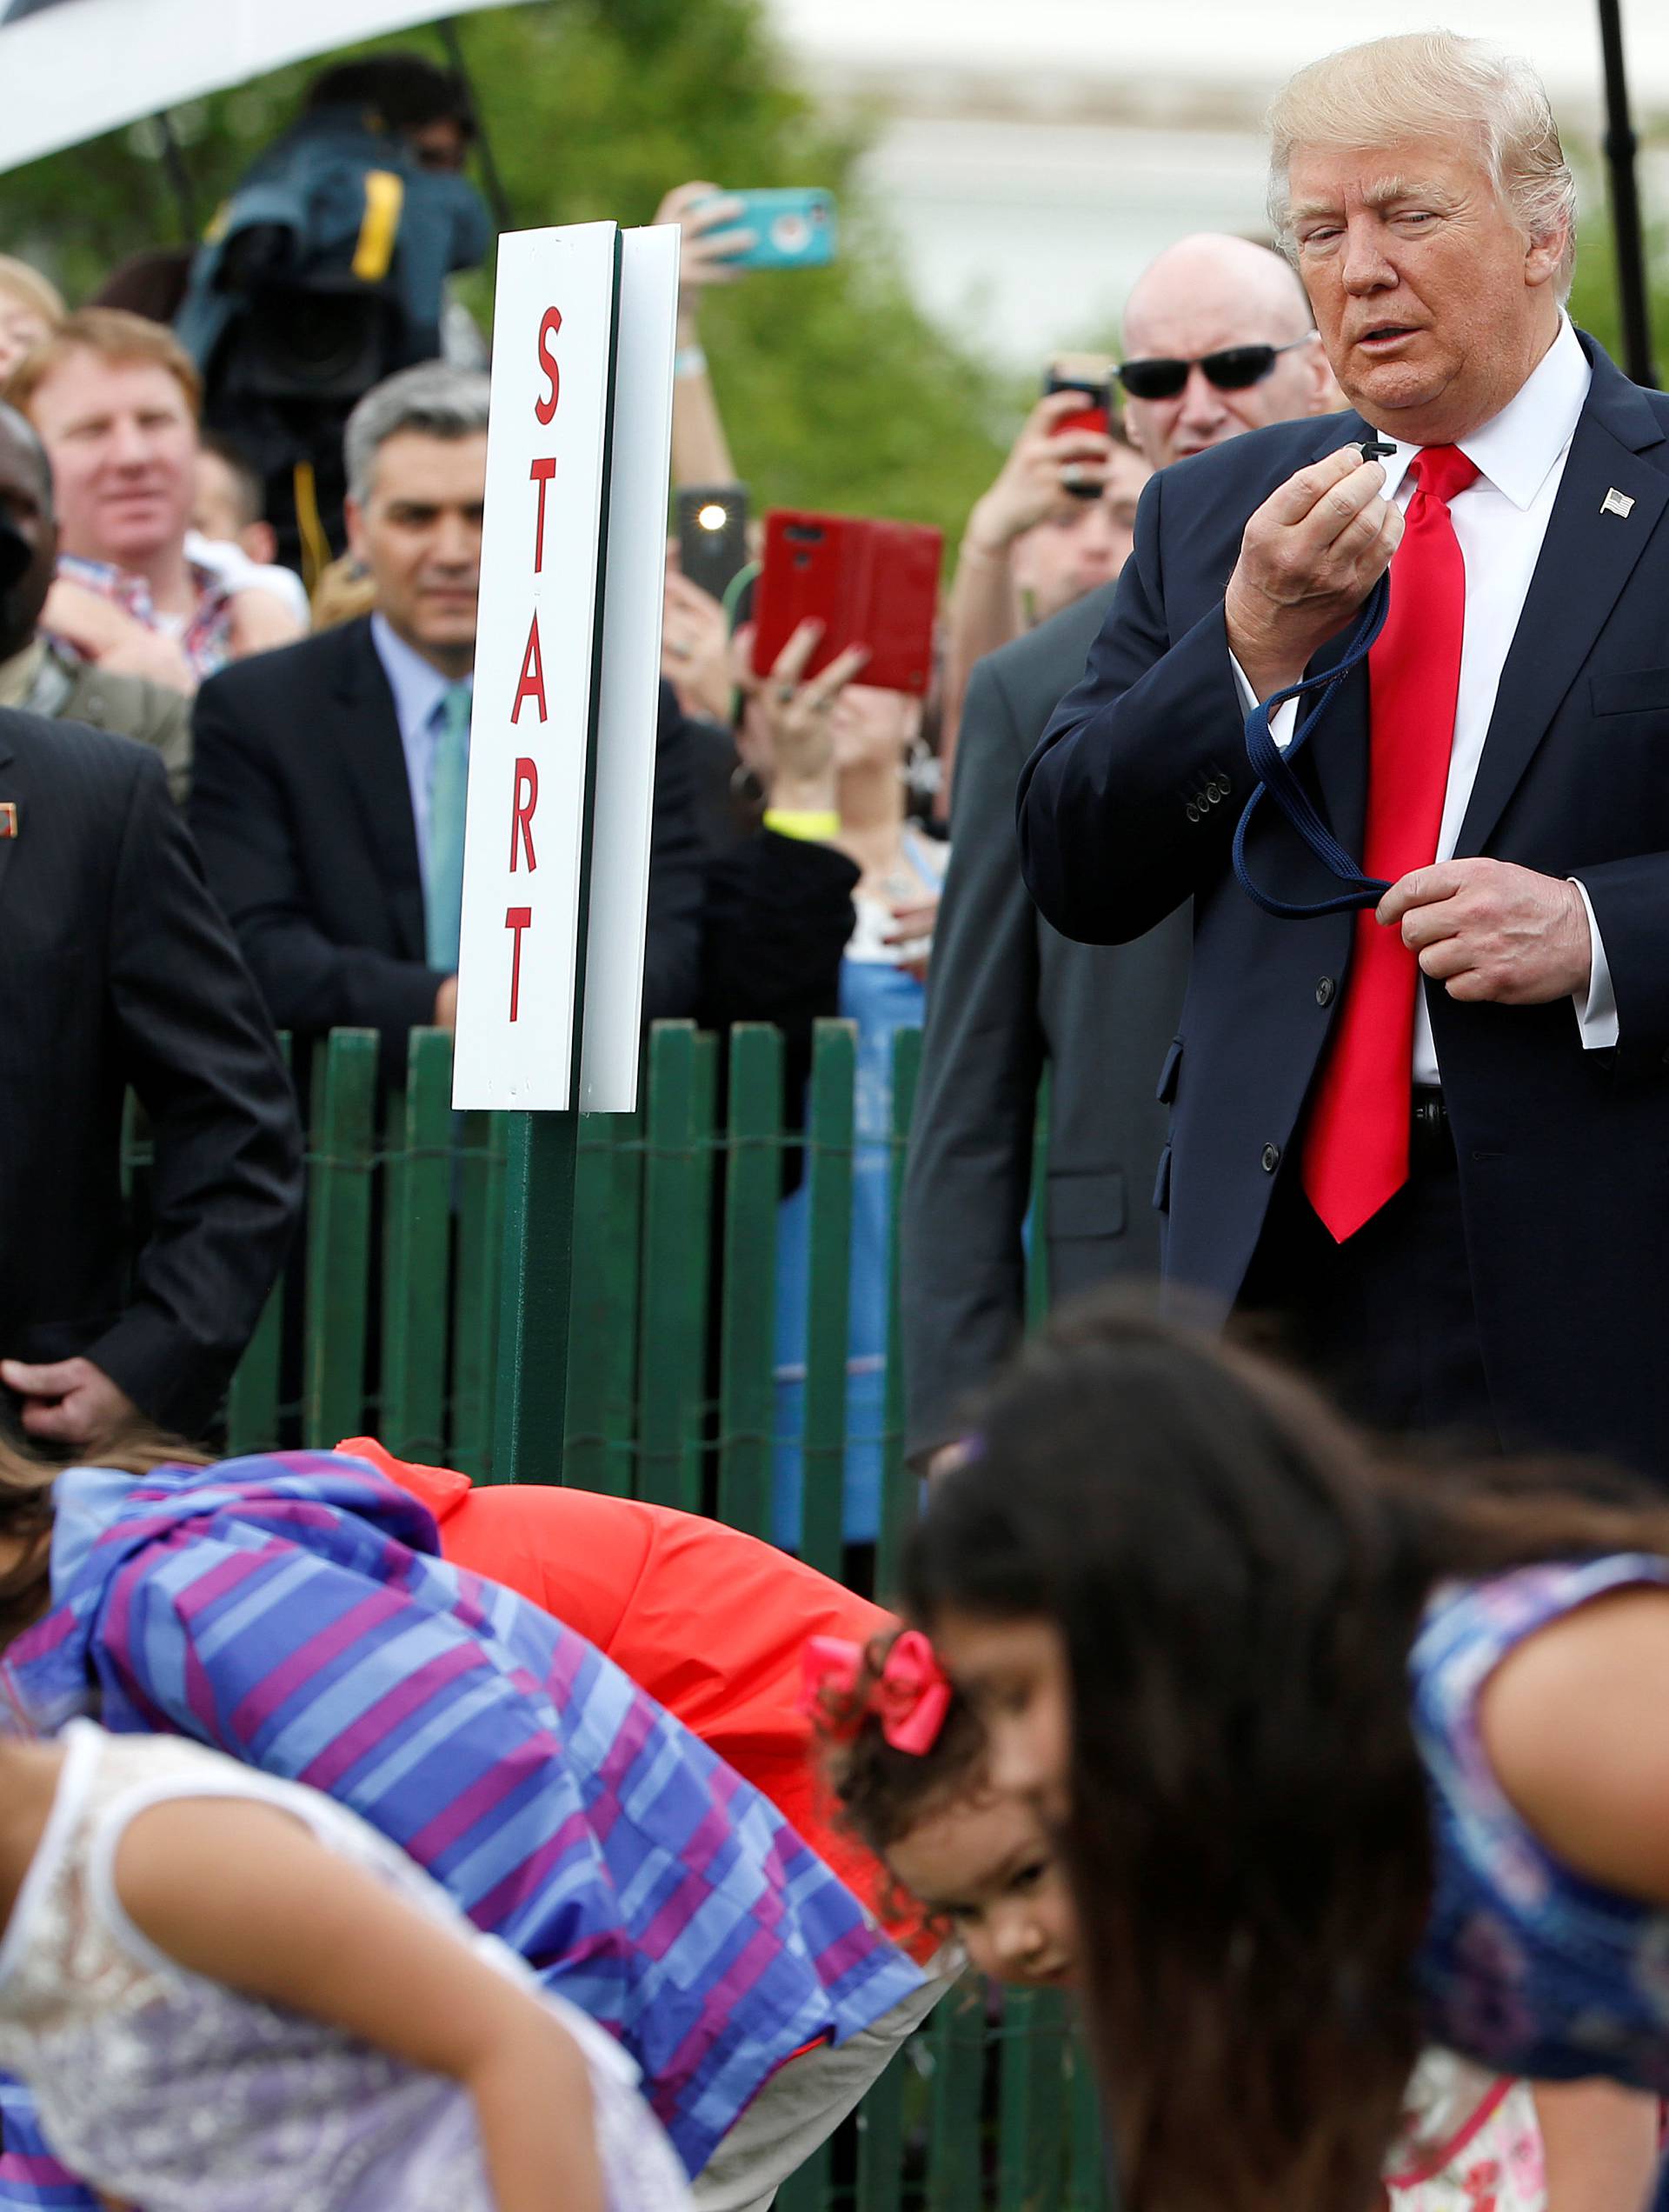 U.S. President Donald Trump watches children roll Easter Eggs at 139th annual White House Easter Egg Roll on the South Lawn of the White House in Washington